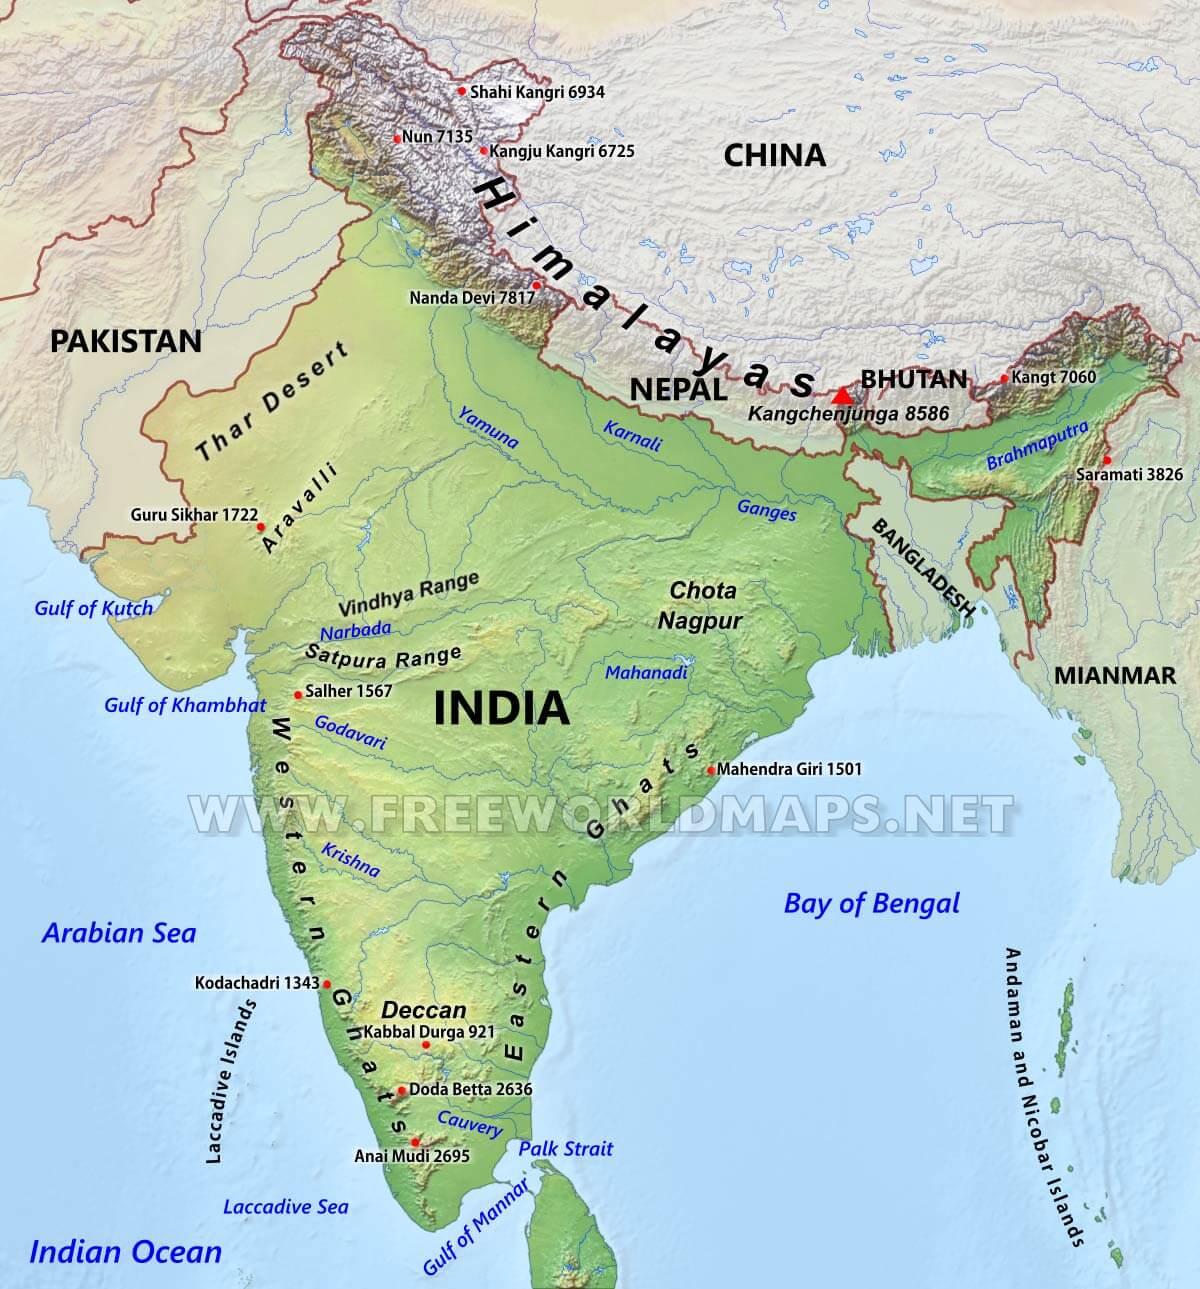 Mountain ranges of India map - Mountain ranges map of India (Southern ...